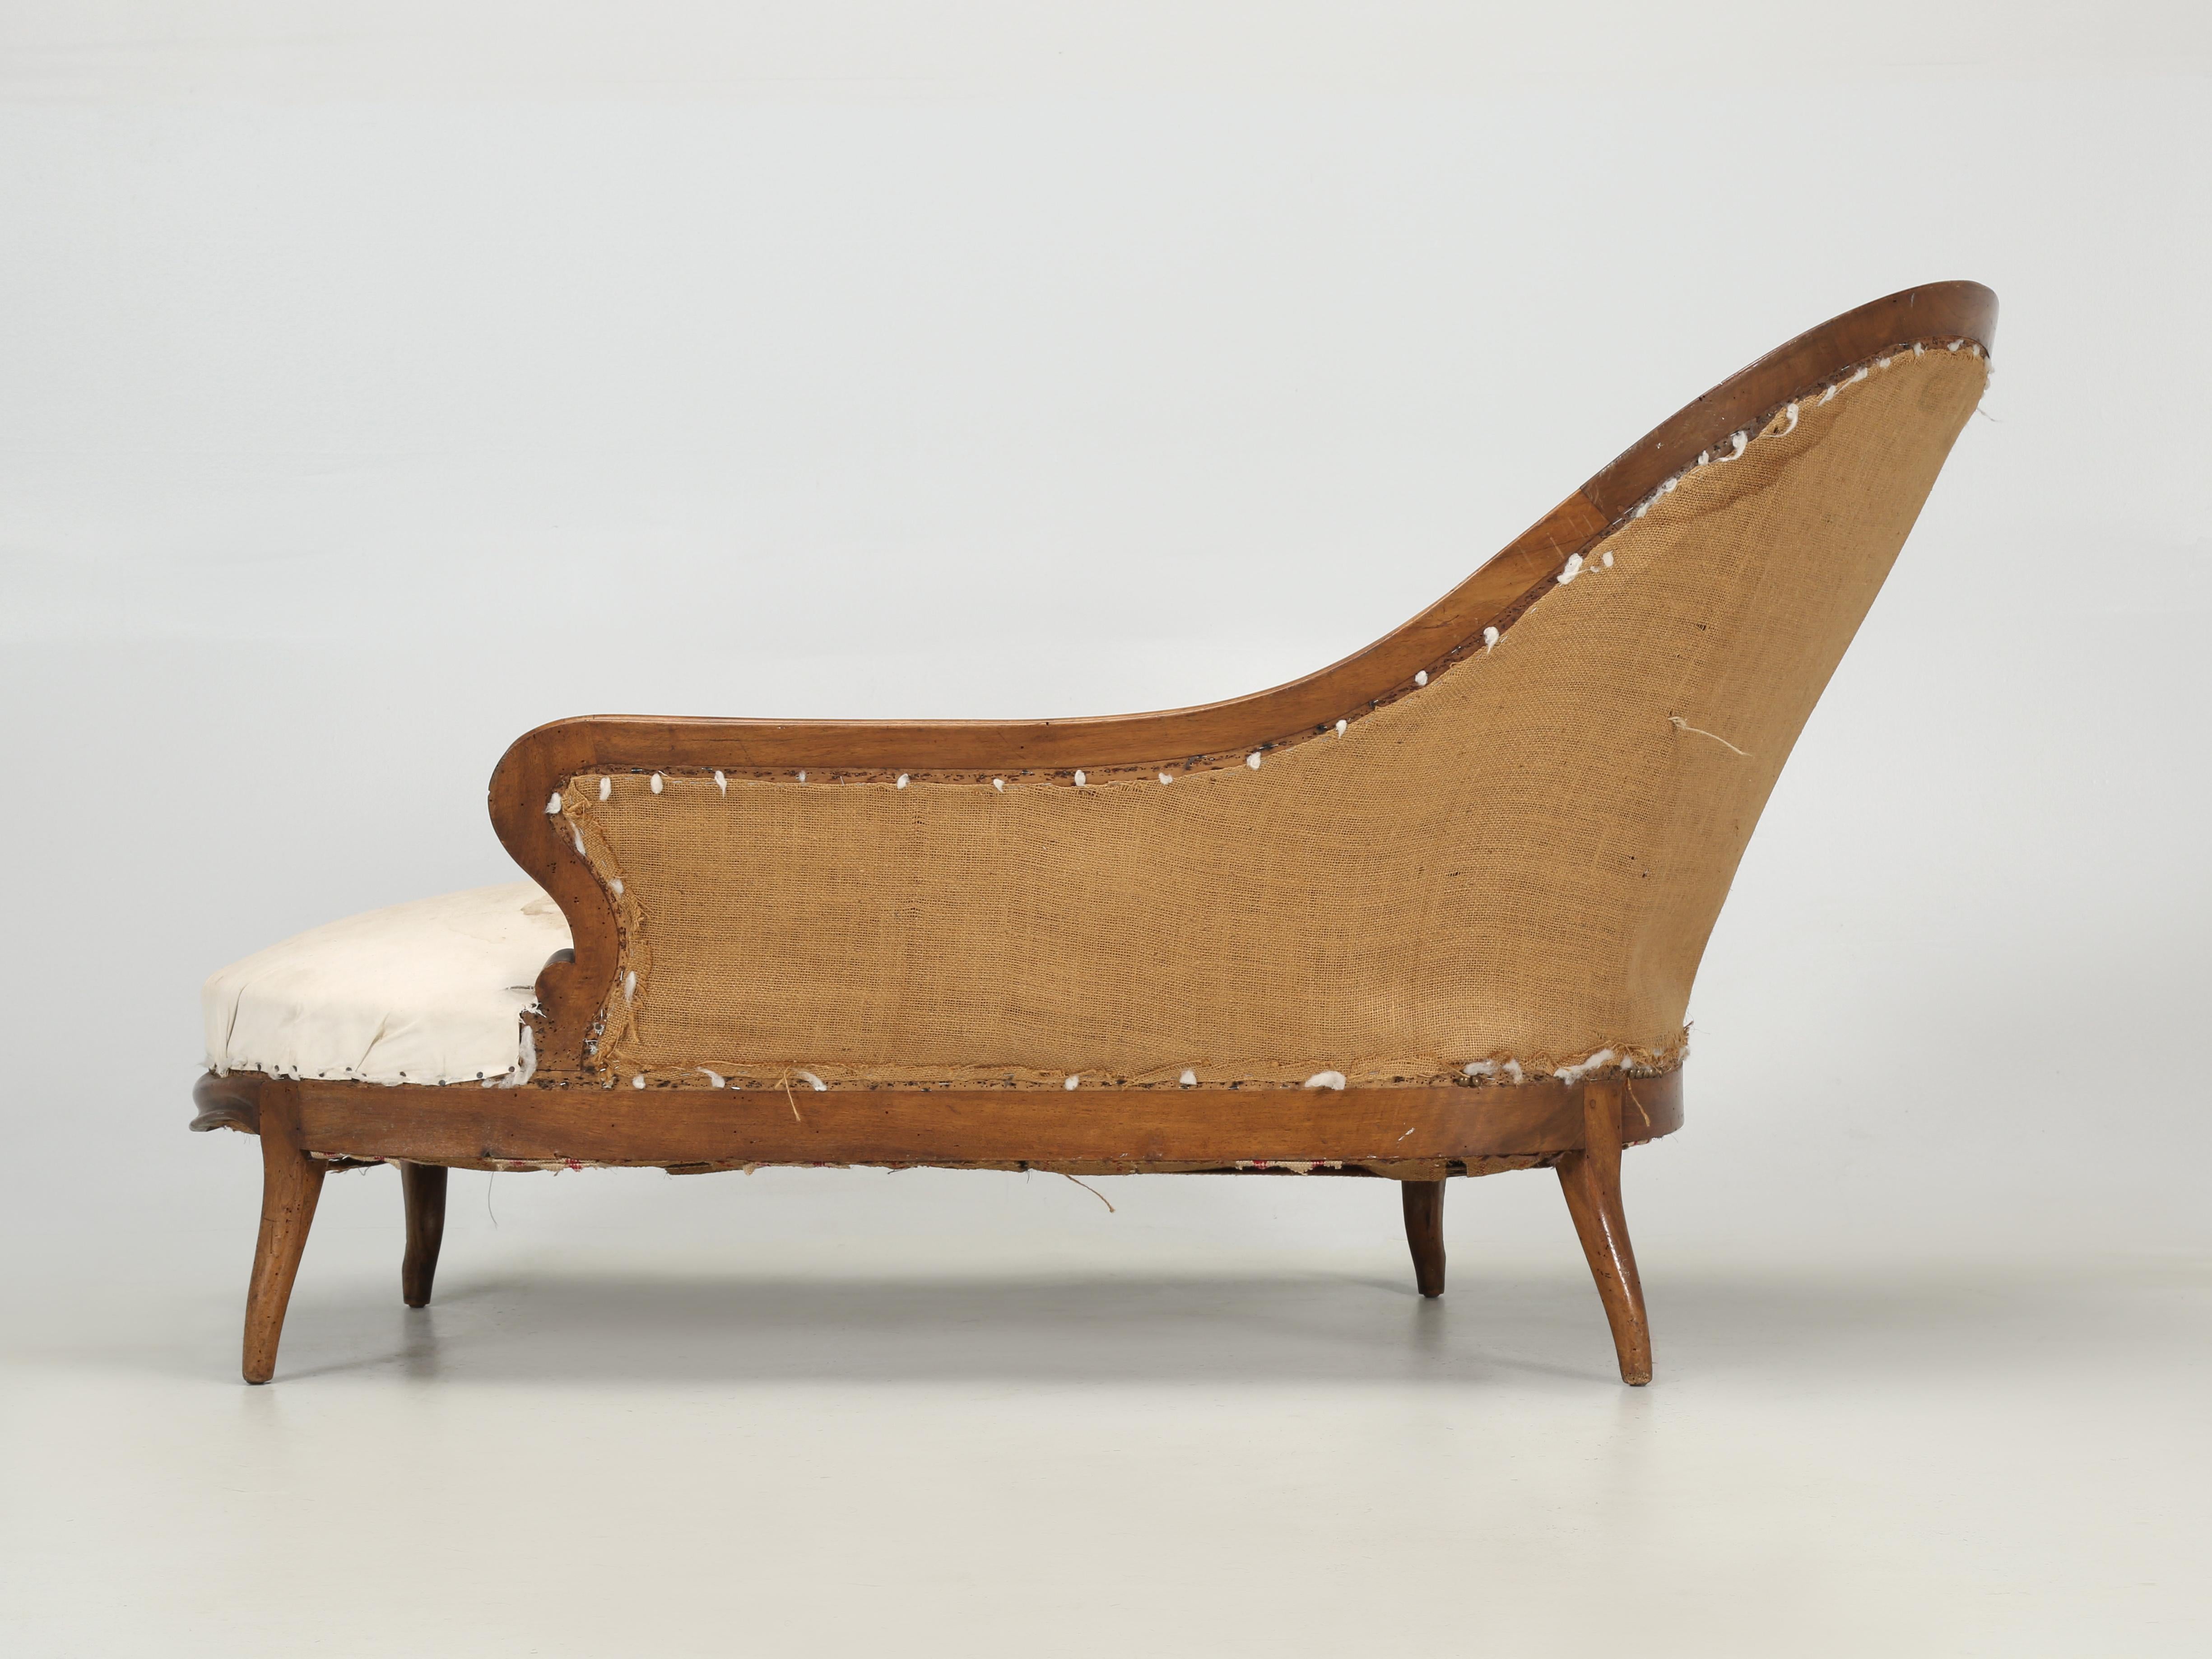 Antique French Chaise Lounge in Figured Walnut in the Méridienne Style, c1860's 6